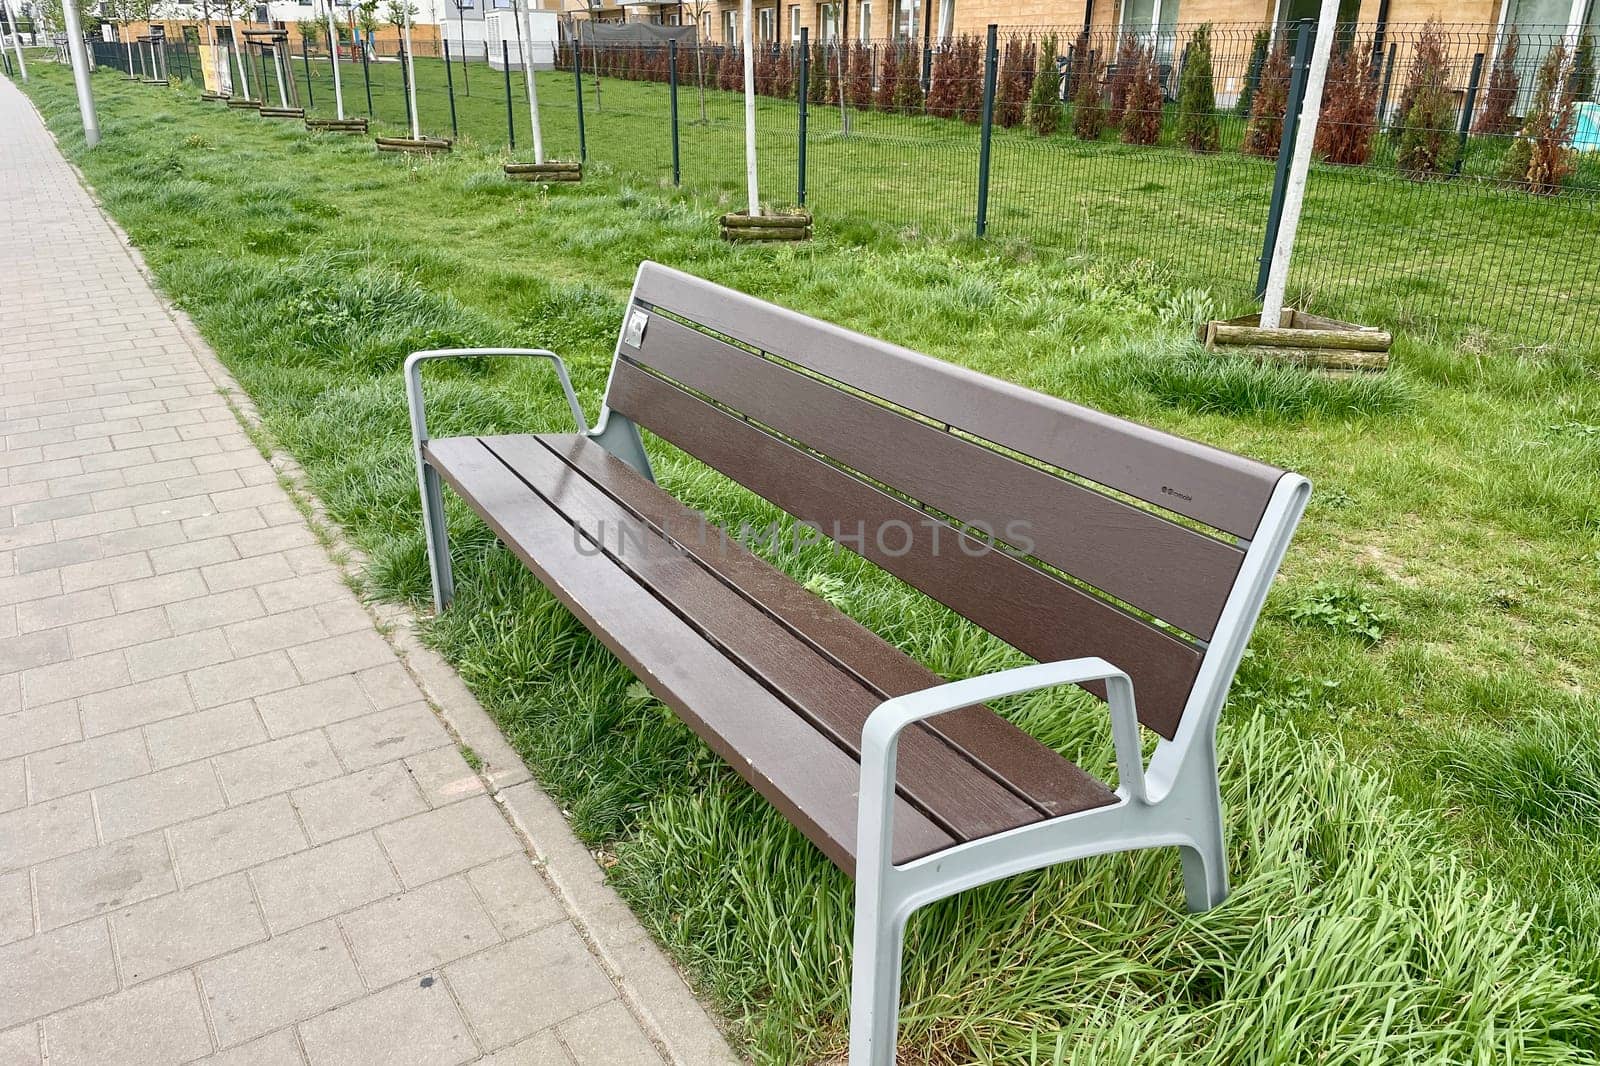 In the city, there is a bench for rest on the side of the pedestrian sidewalk. High quality photo